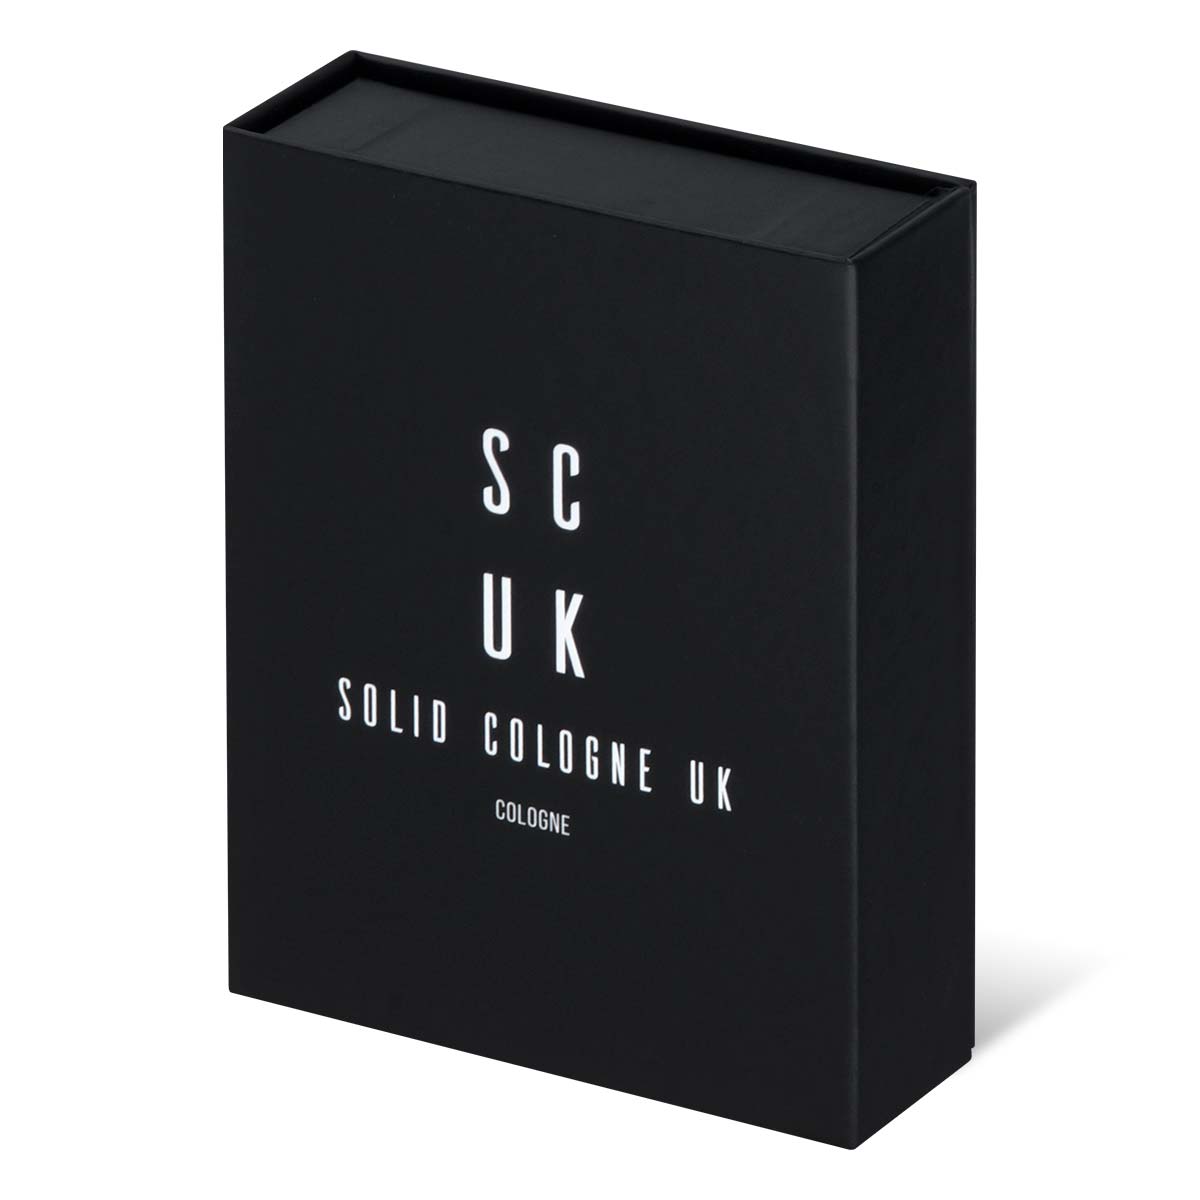 Solid Cologne UK Gift Box-p_1